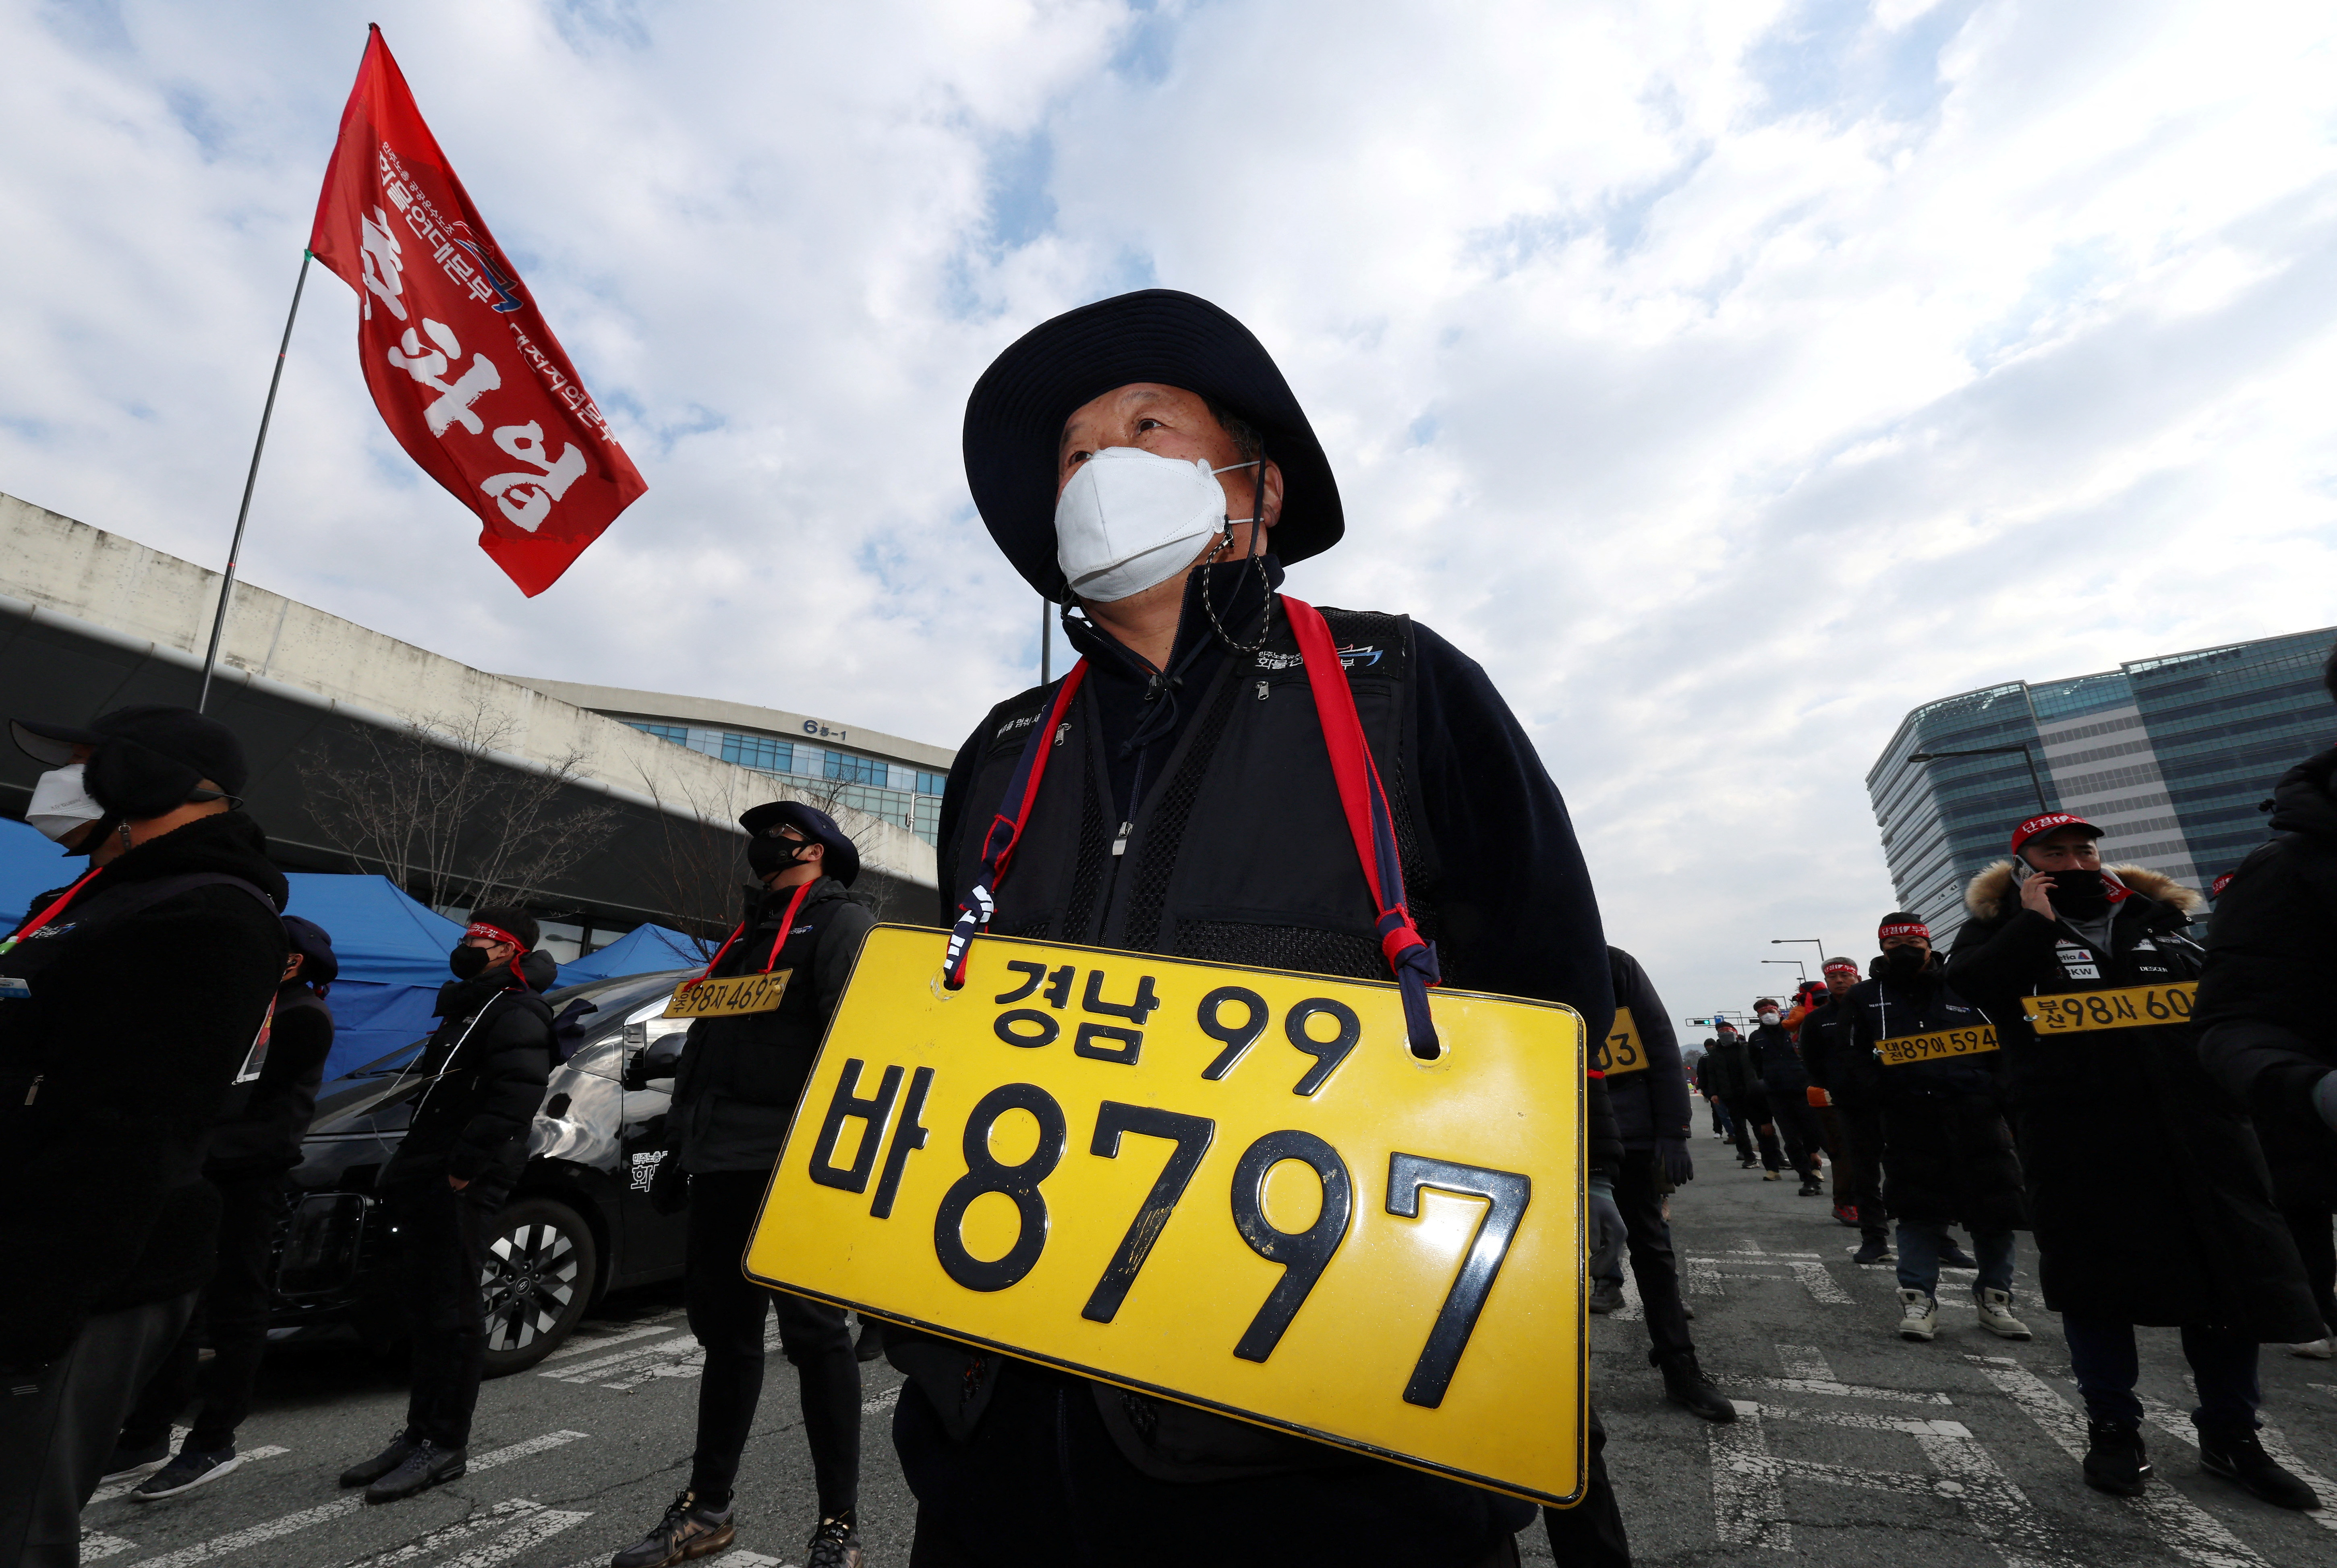 Unionized truckers attend a rally during their strike in Sejong